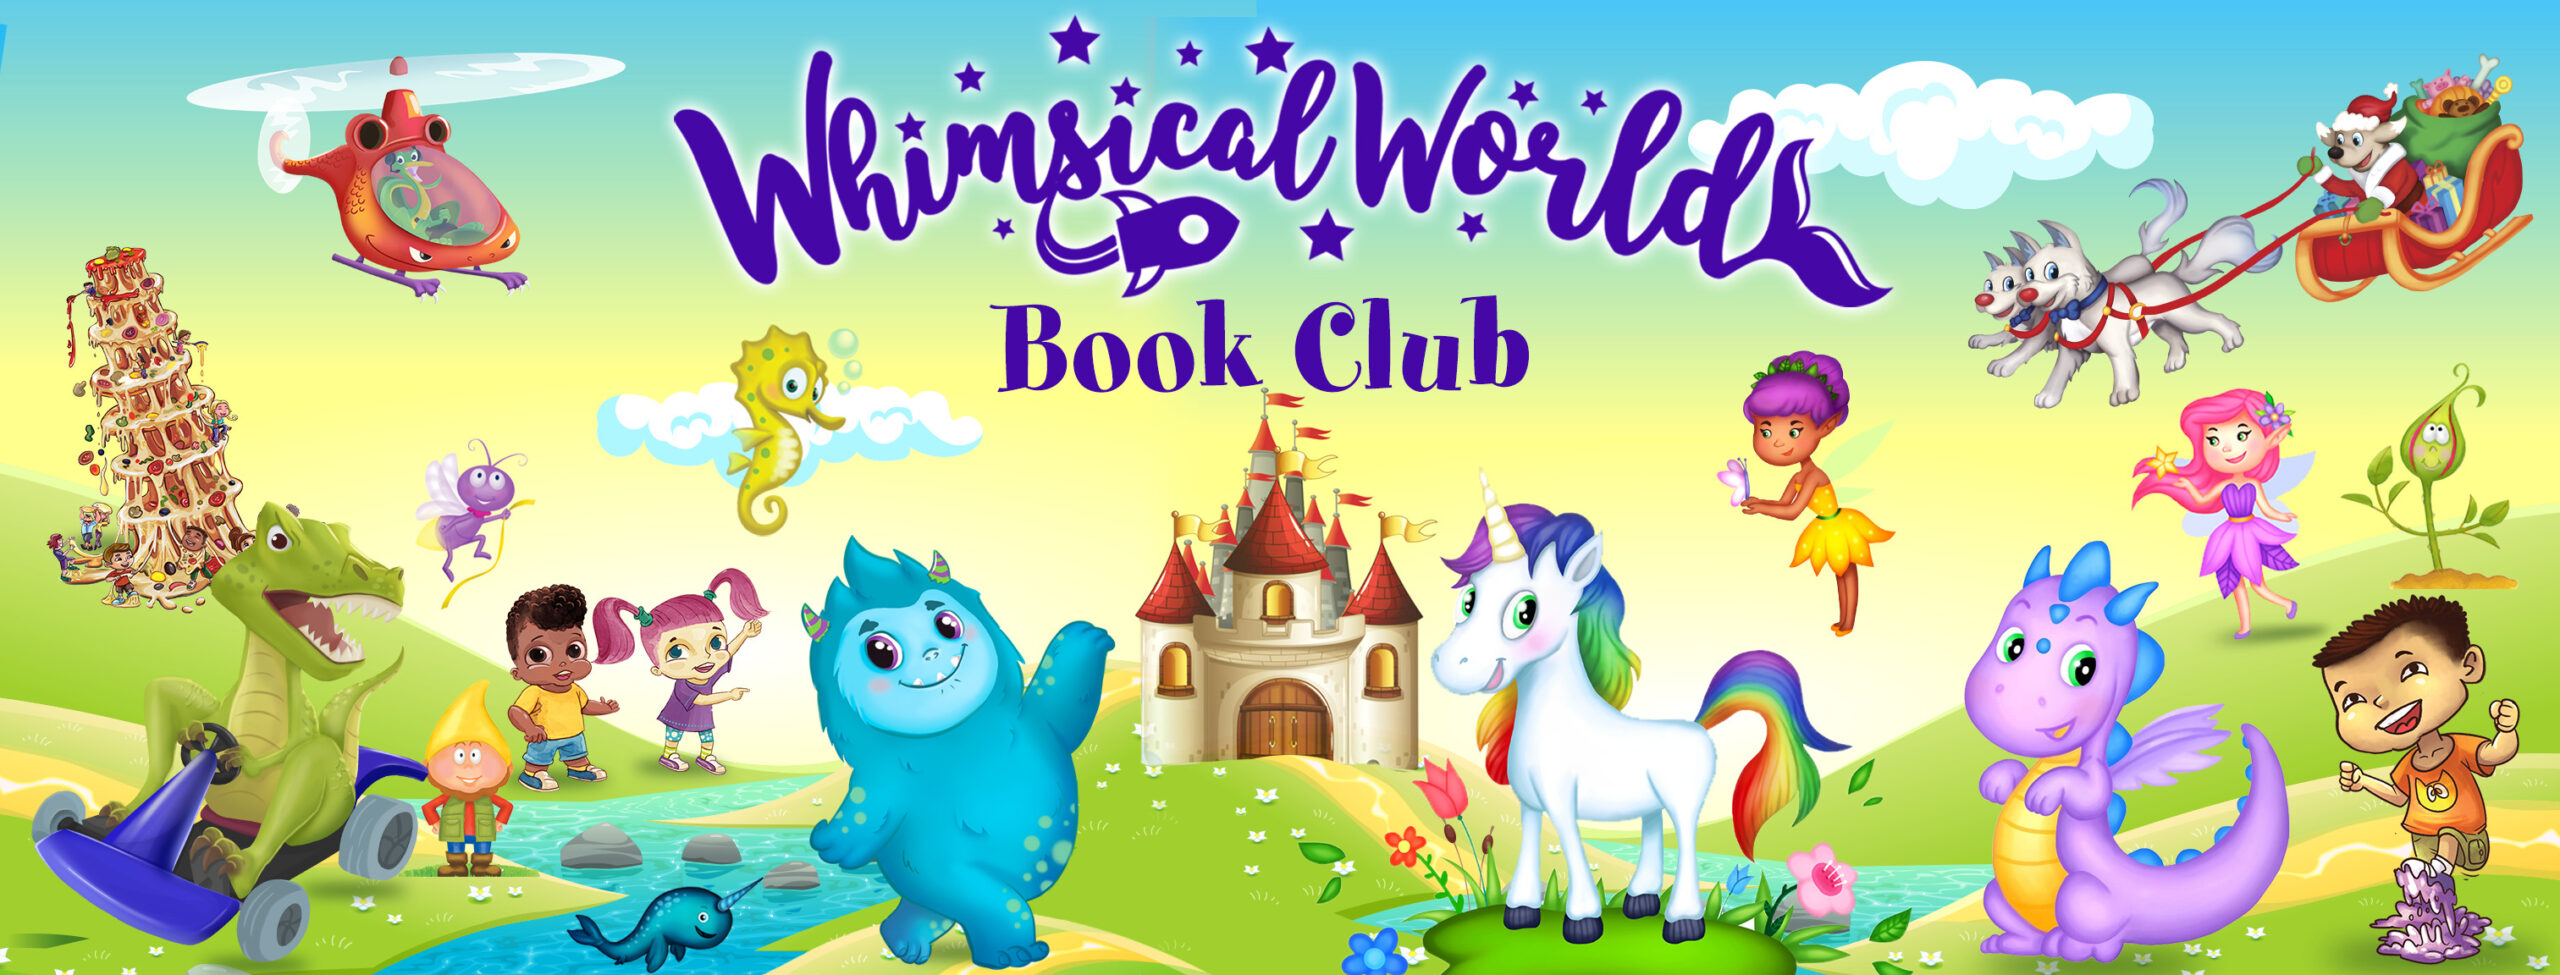 Whimsical World Book Club by Children's Authors Sheri Fink and Derek Taylor Kent